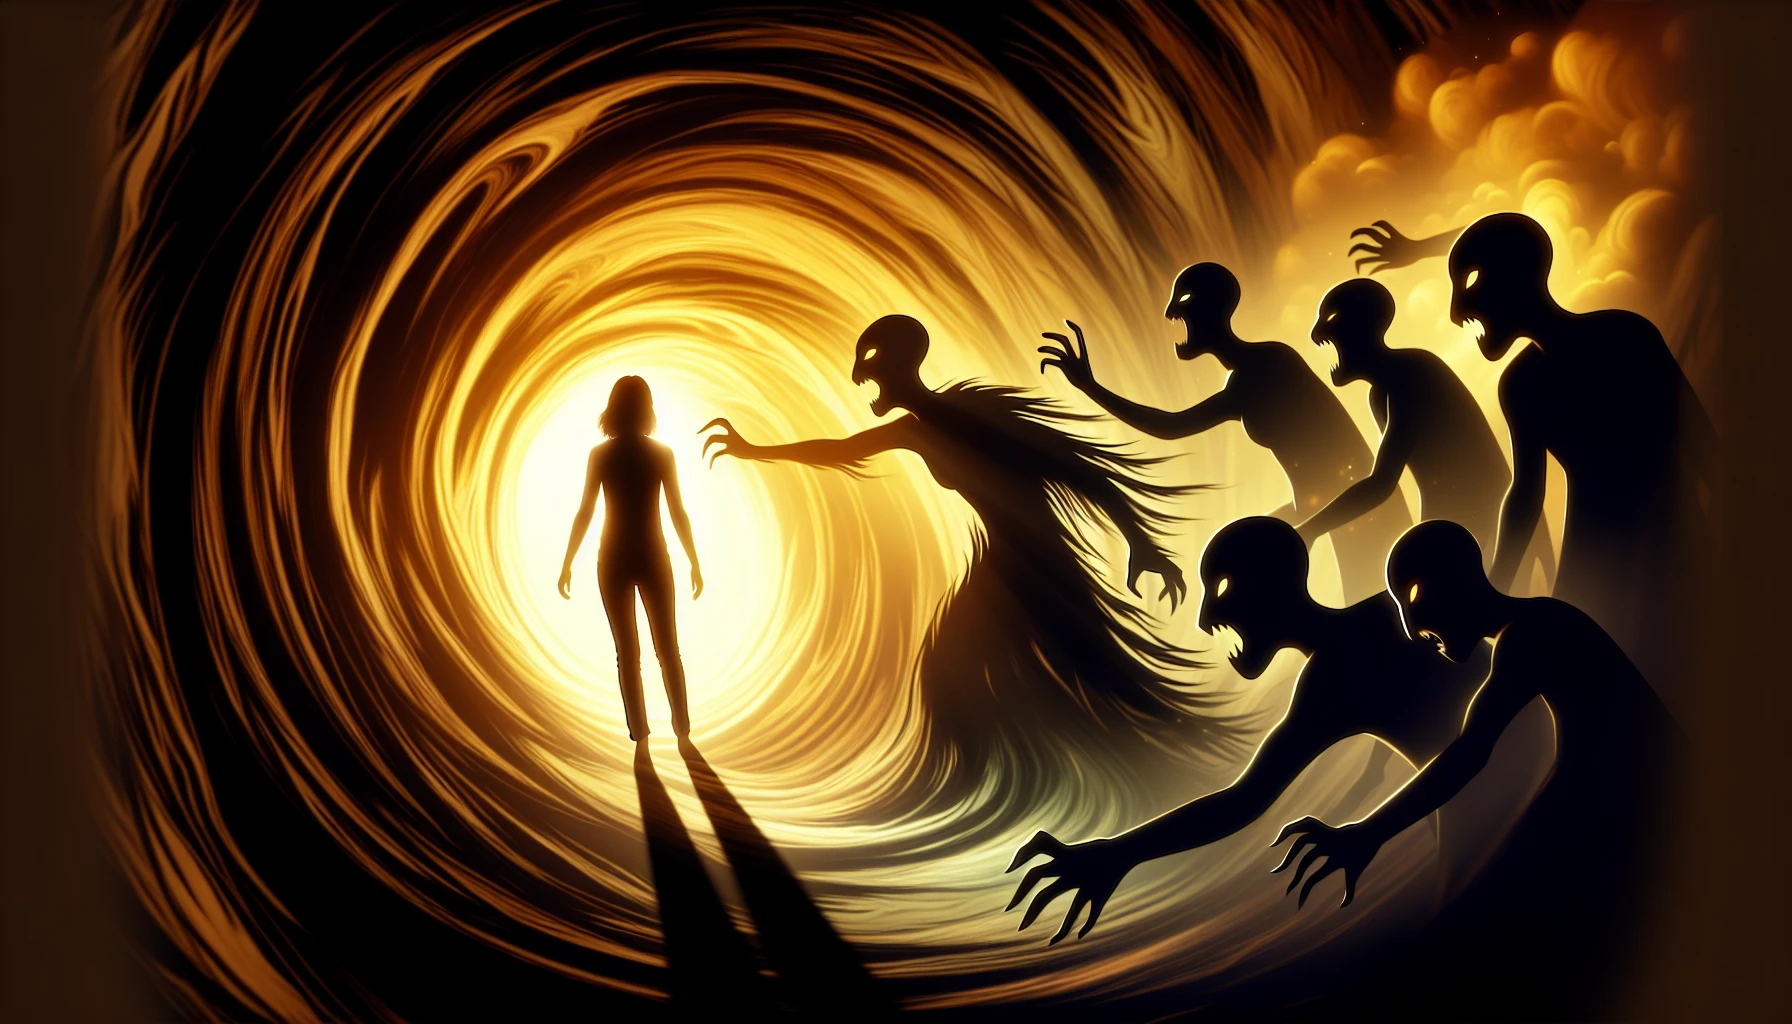 Illustration of a person setting boundaries with shadowy figures representing narcissistic behaviors